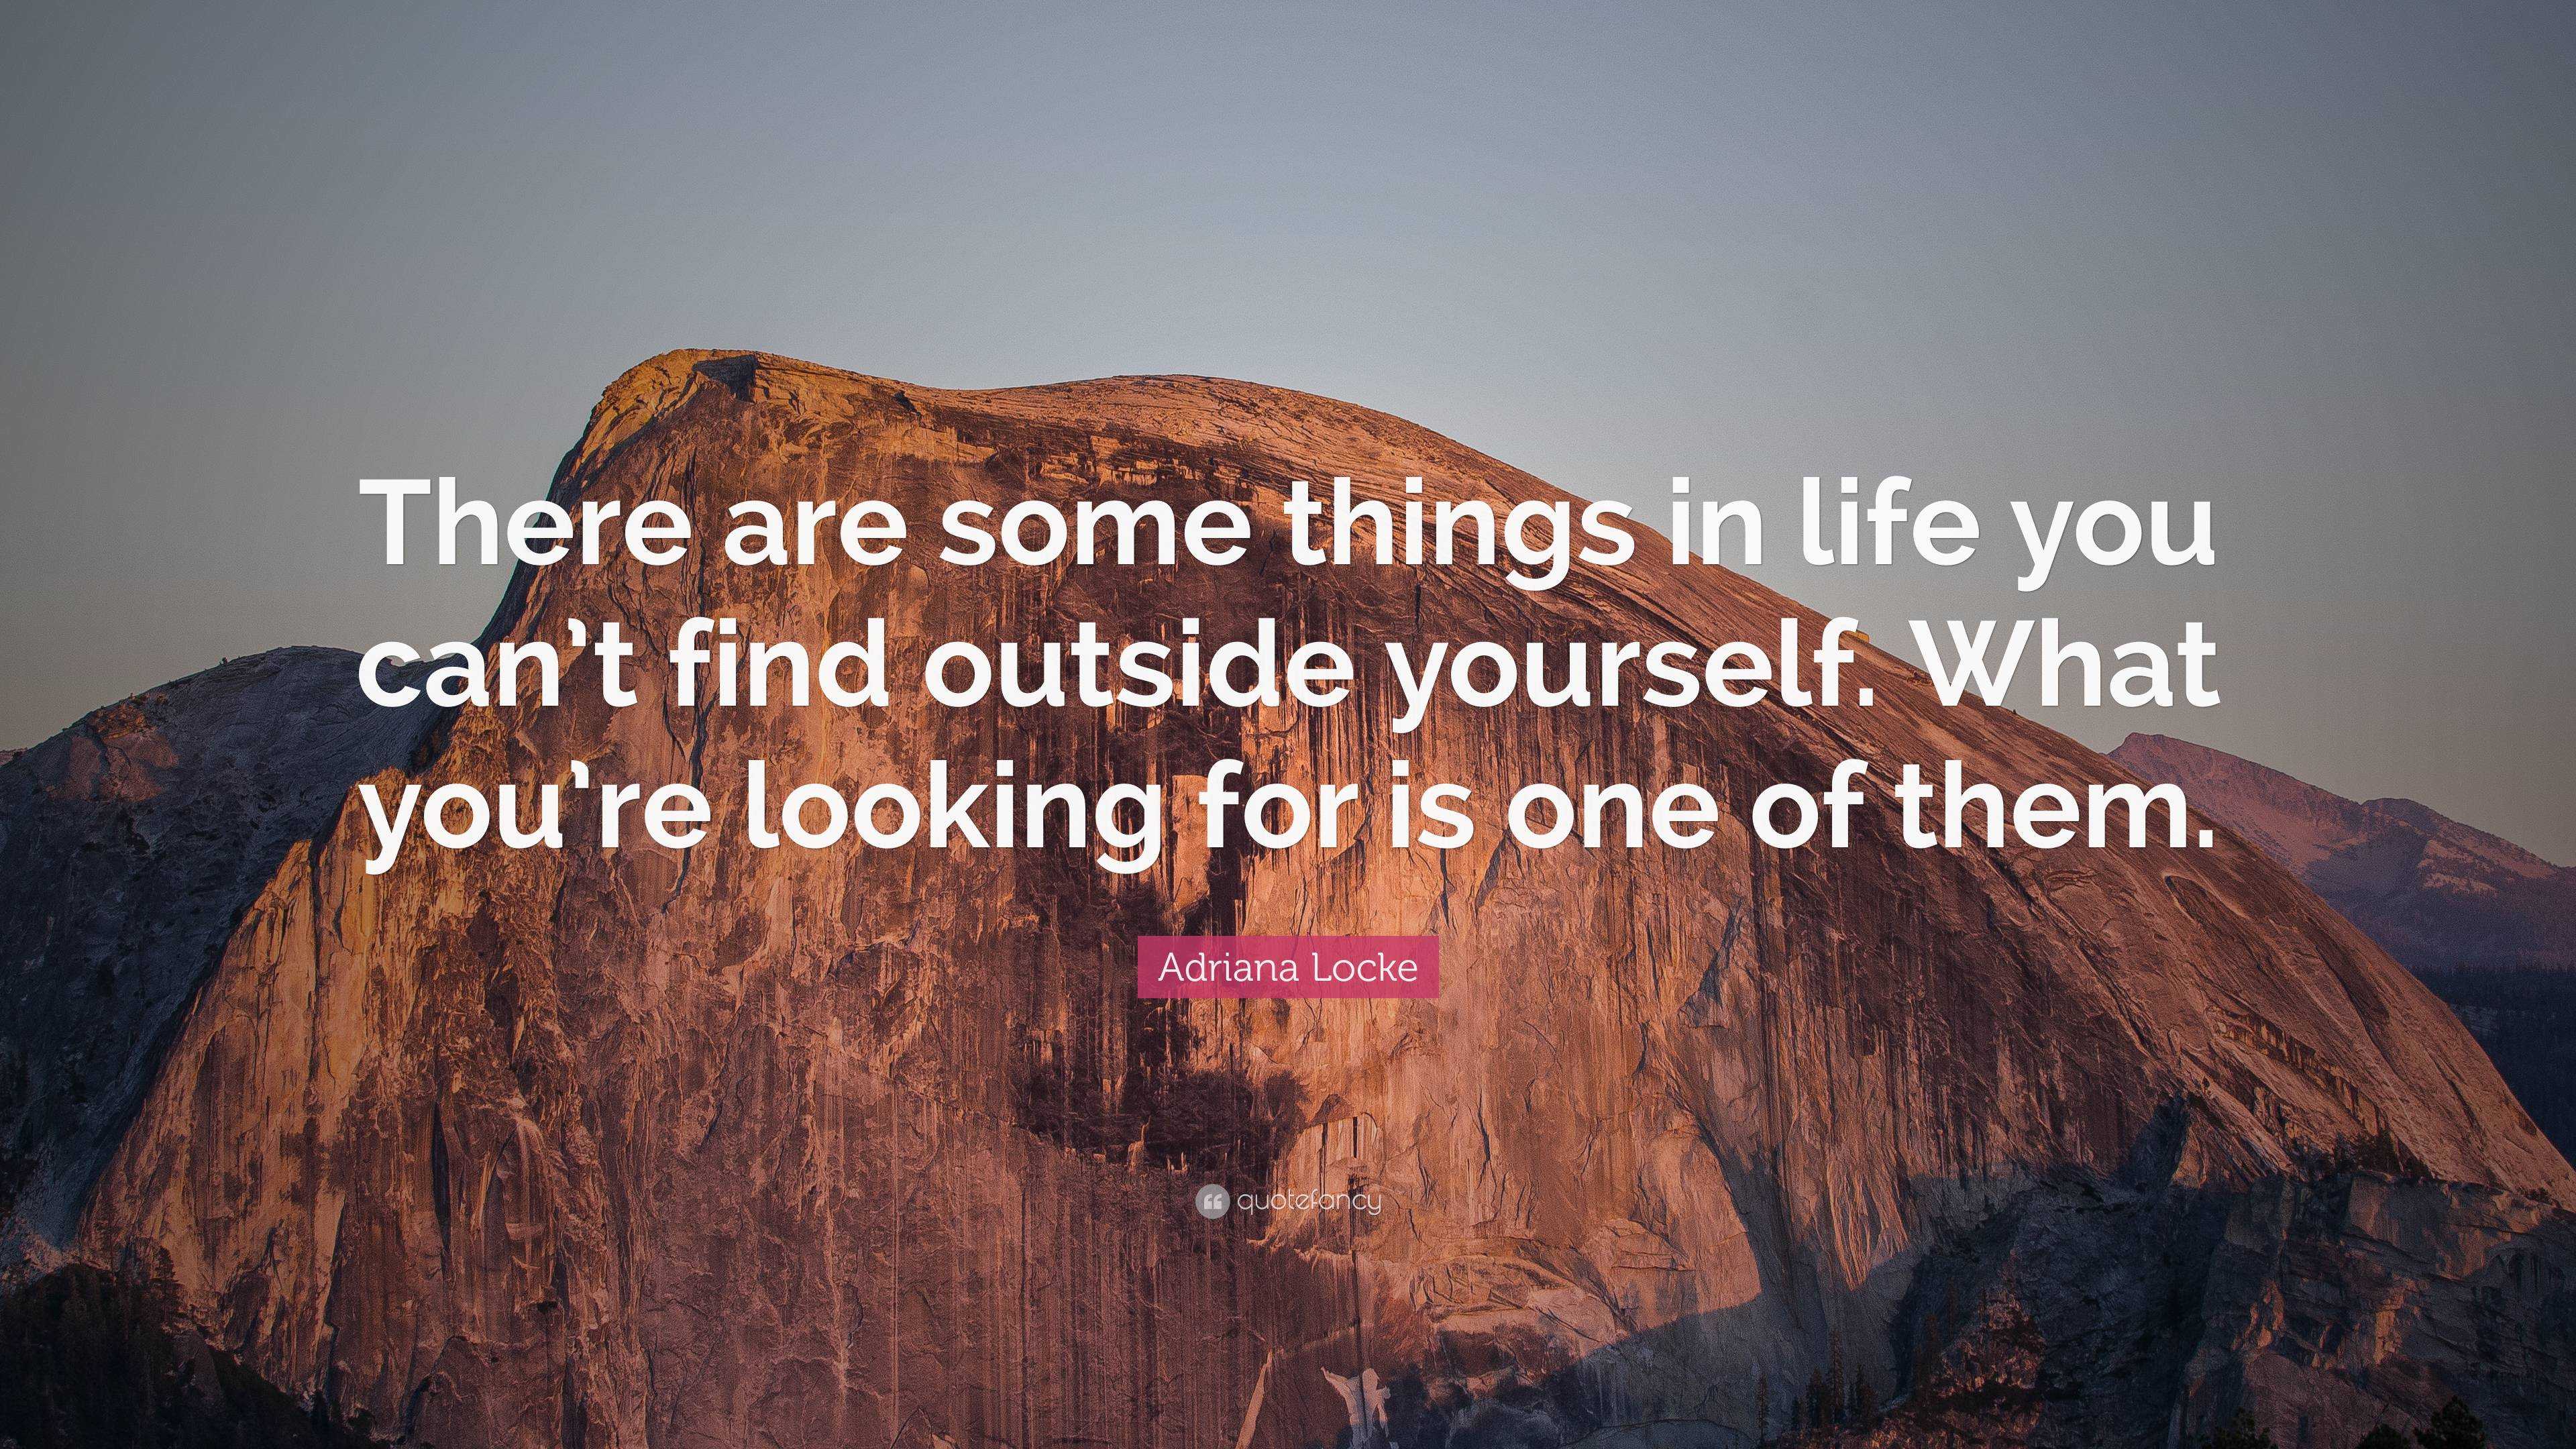 Adriana Locke Quote: “There are some things in life you can’t find ...